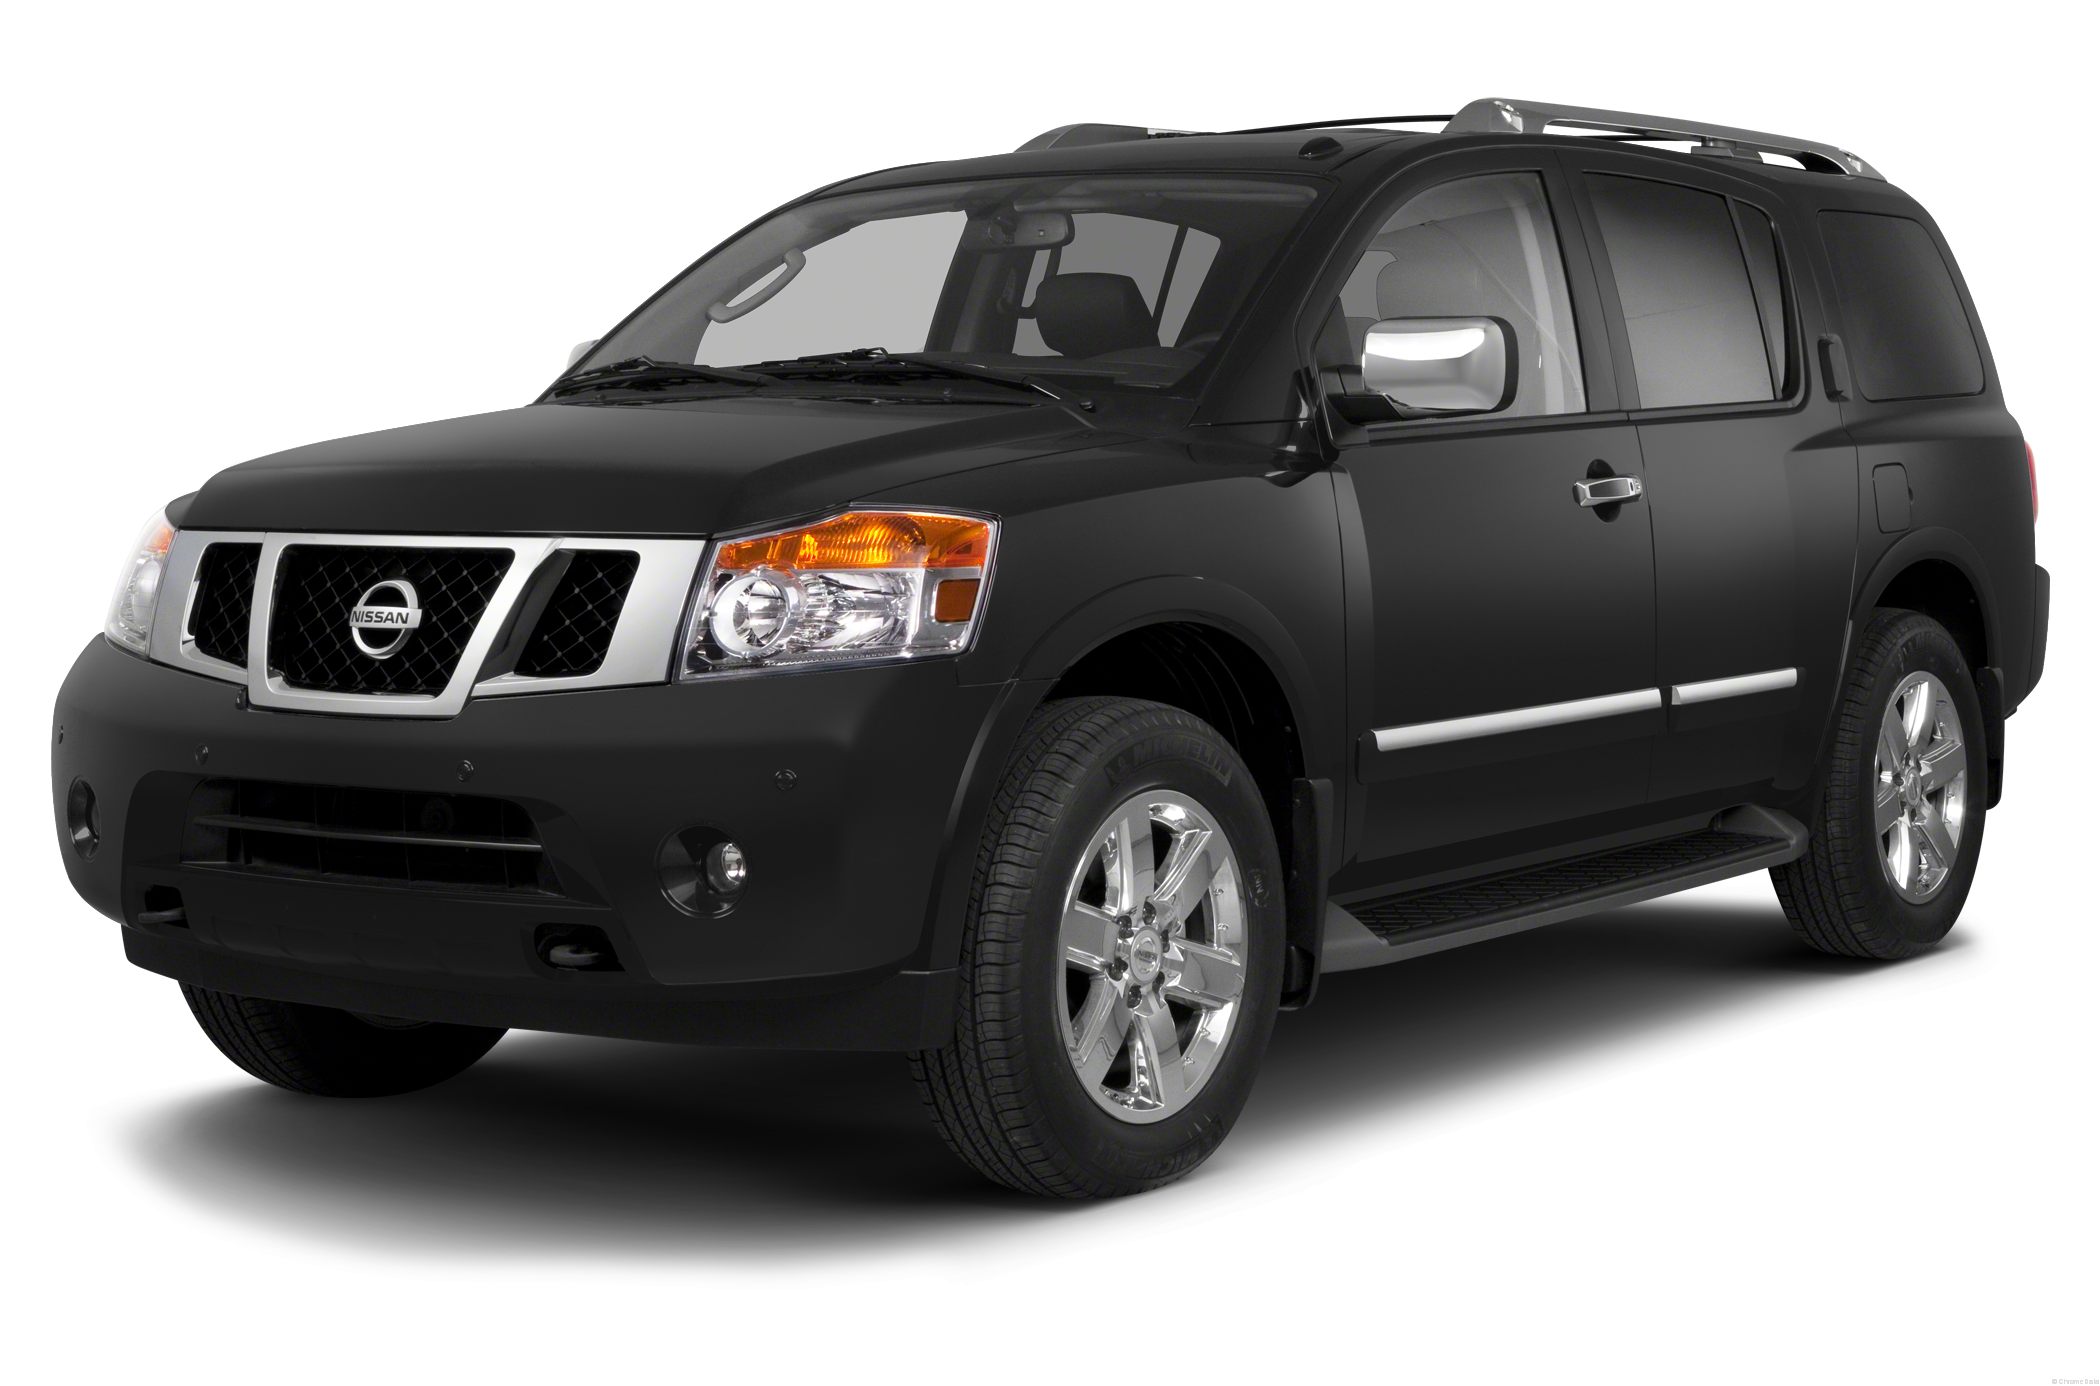 Nissan Armada Tuner By Bully Dog Vehicle Programmer